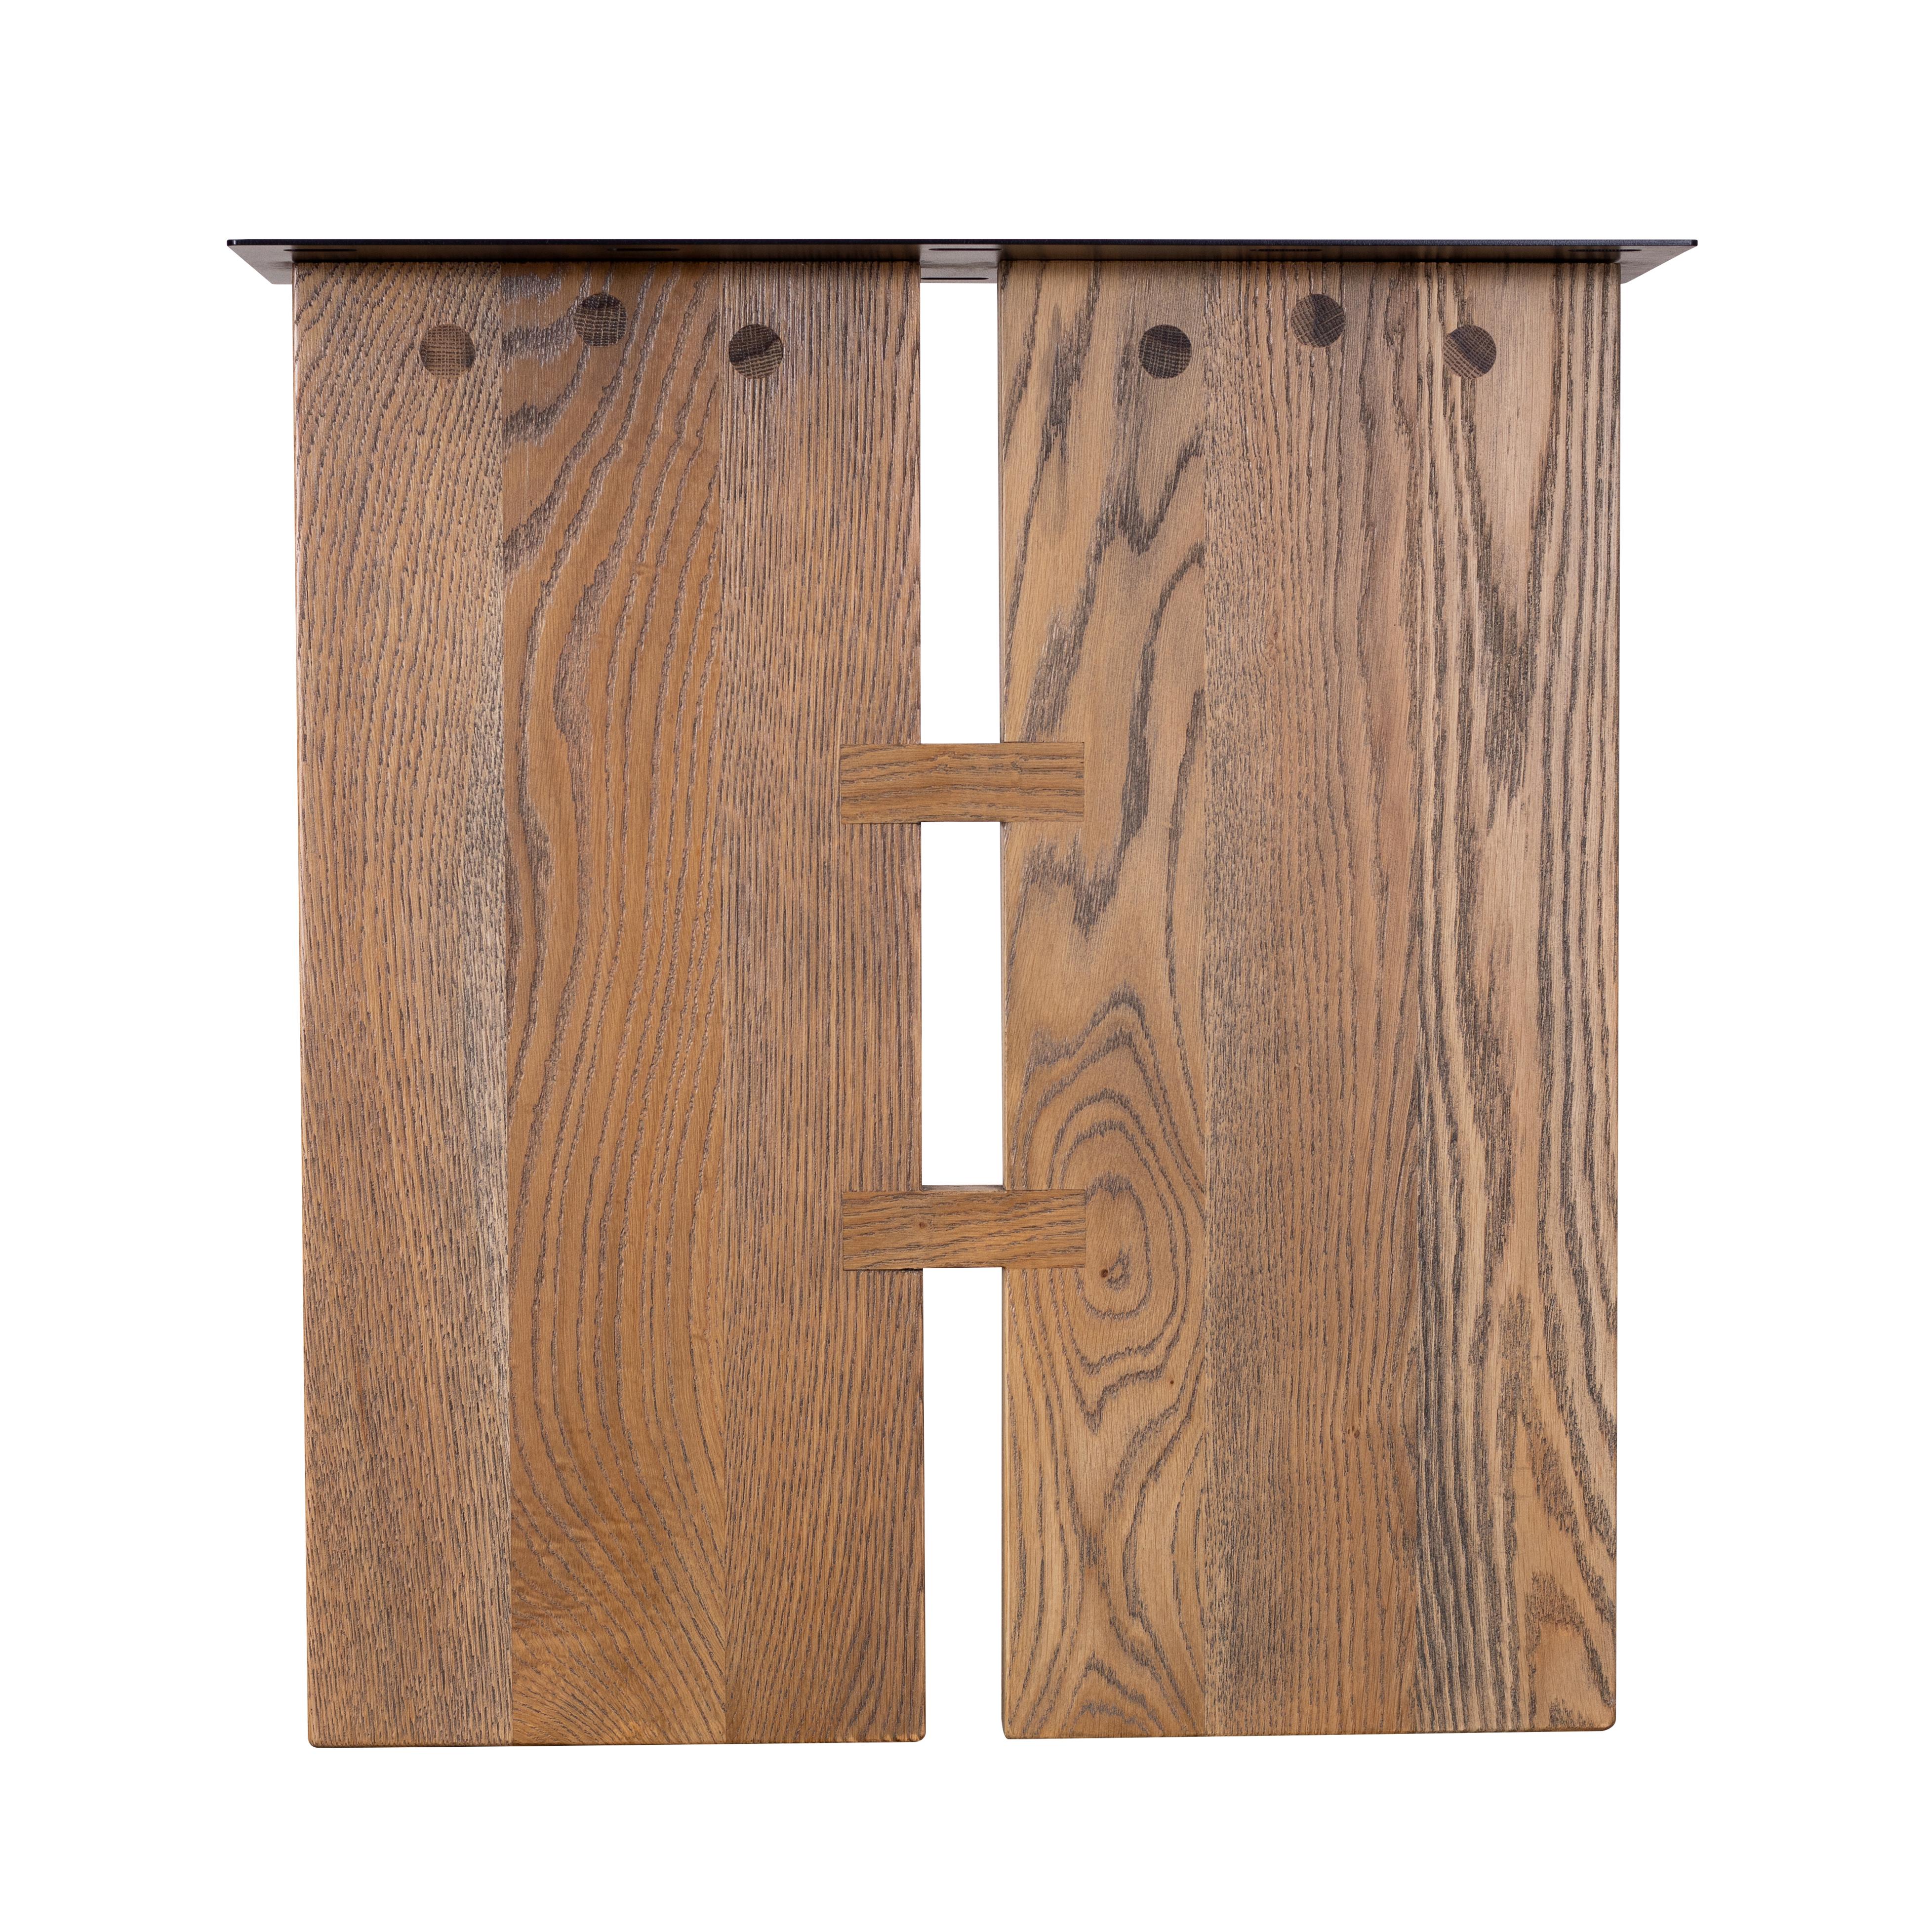 Hand-Crafted Solid Oak Dining Table with Wood Legs in a Sandblasted Autumn Stain For Sale